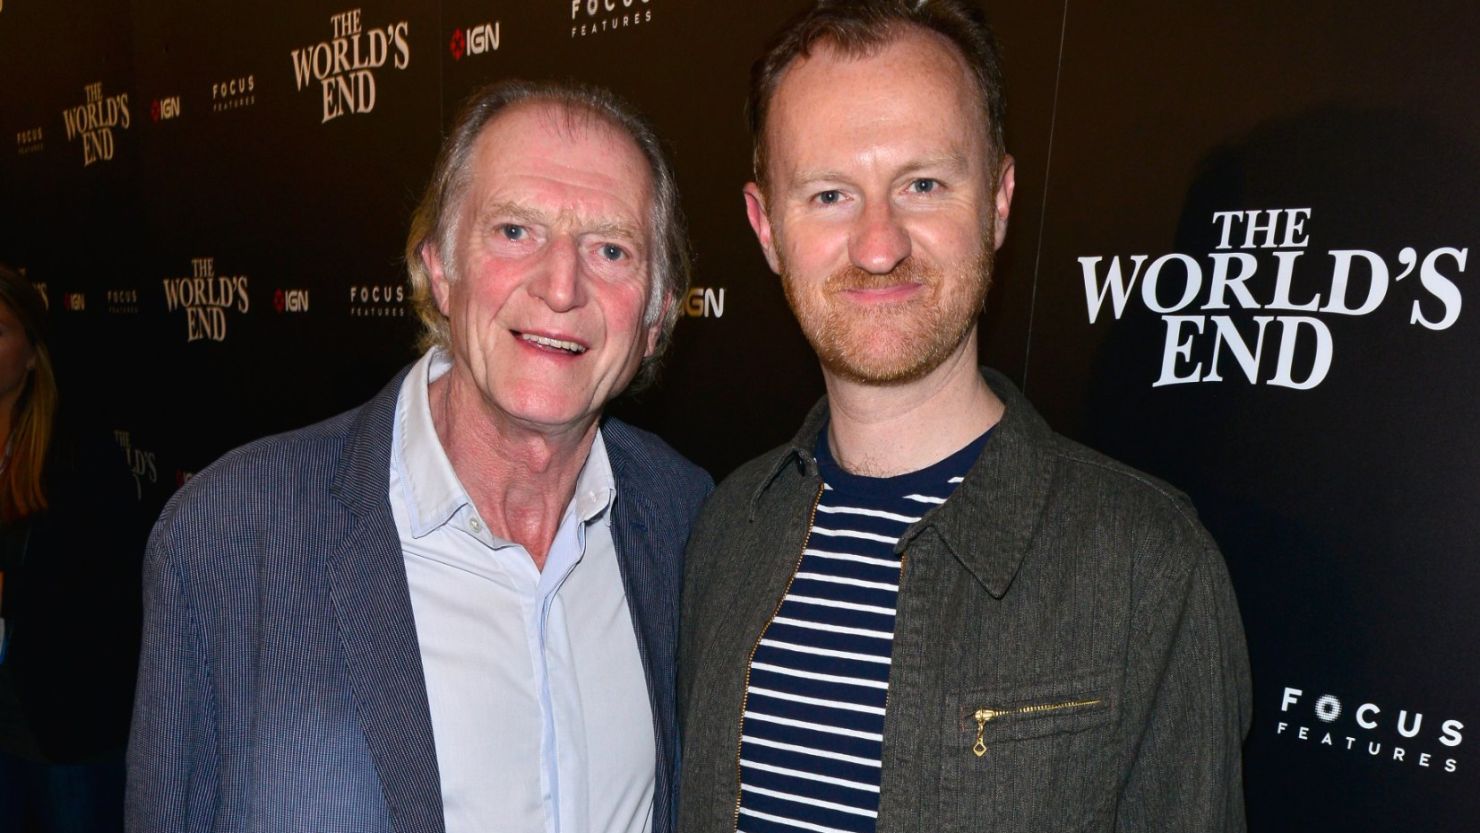 Actors David Bradley and Mark Gatiss attend a Comic-Con party on July 18, 2013.